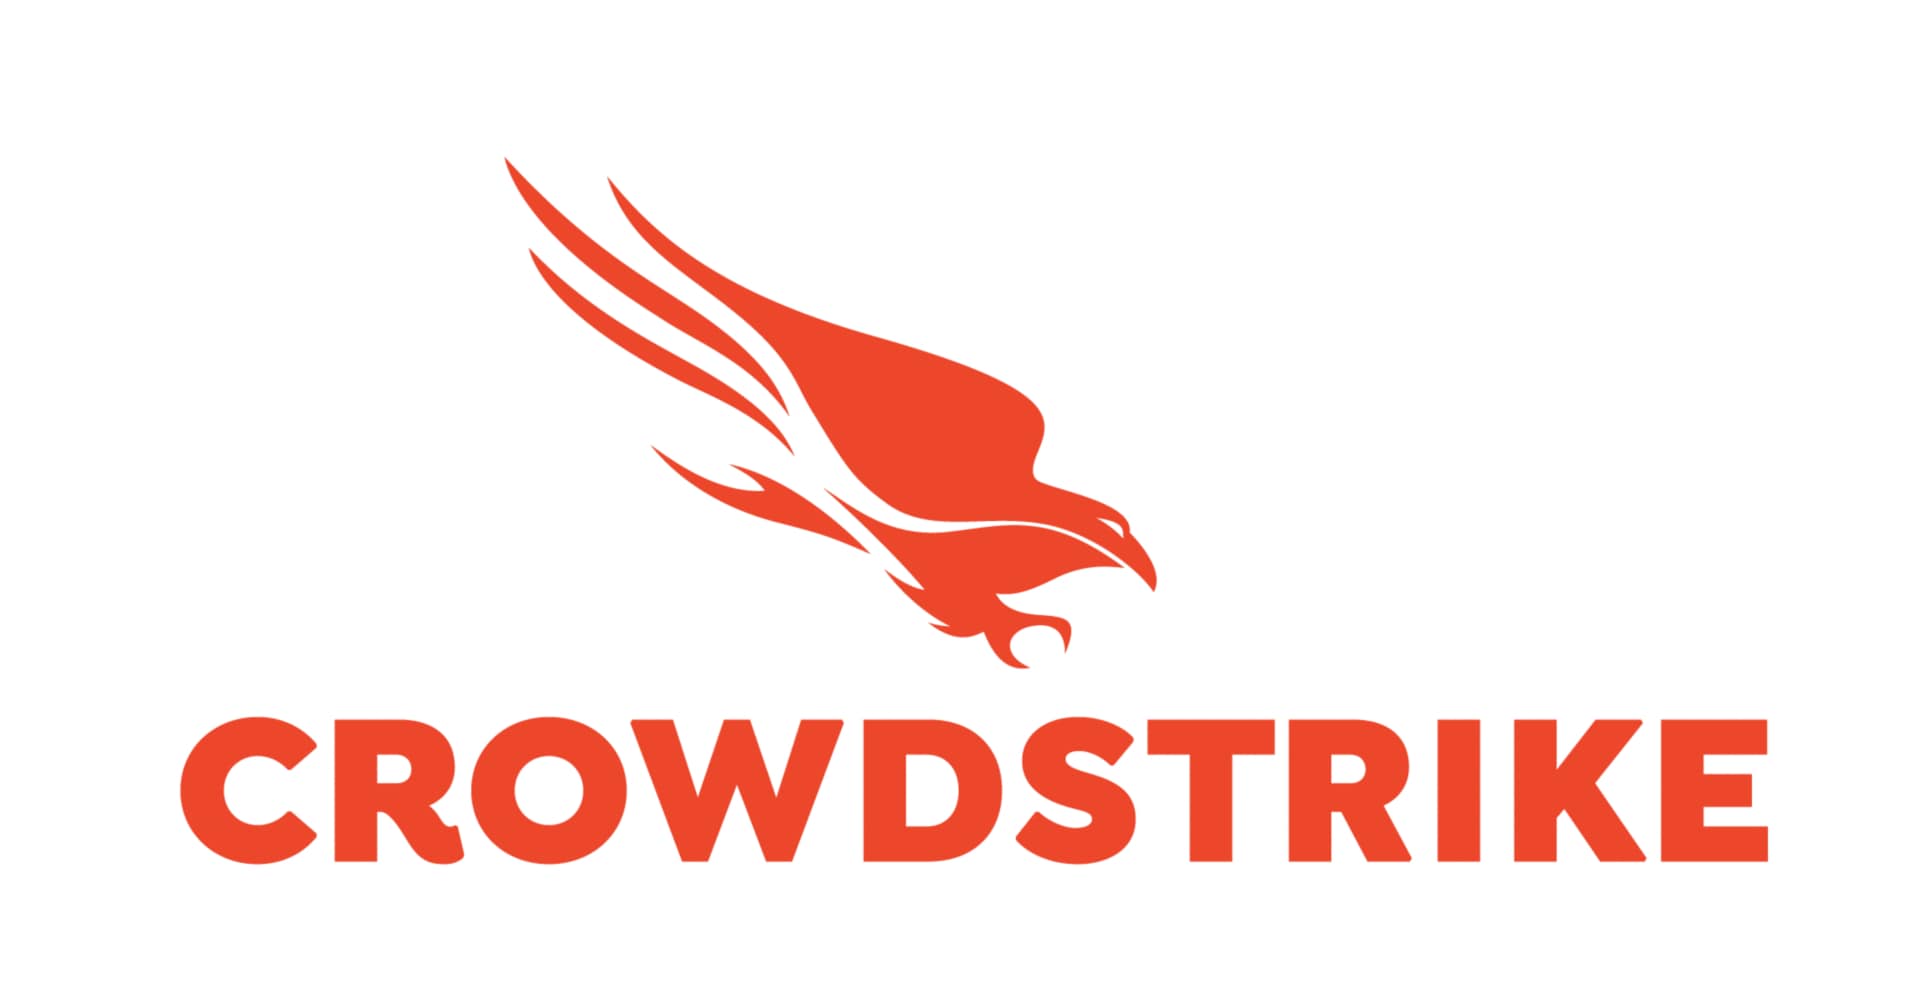 CrowdStrike 36-Month Identity Threat Protection Complete Bundle Software Subscription